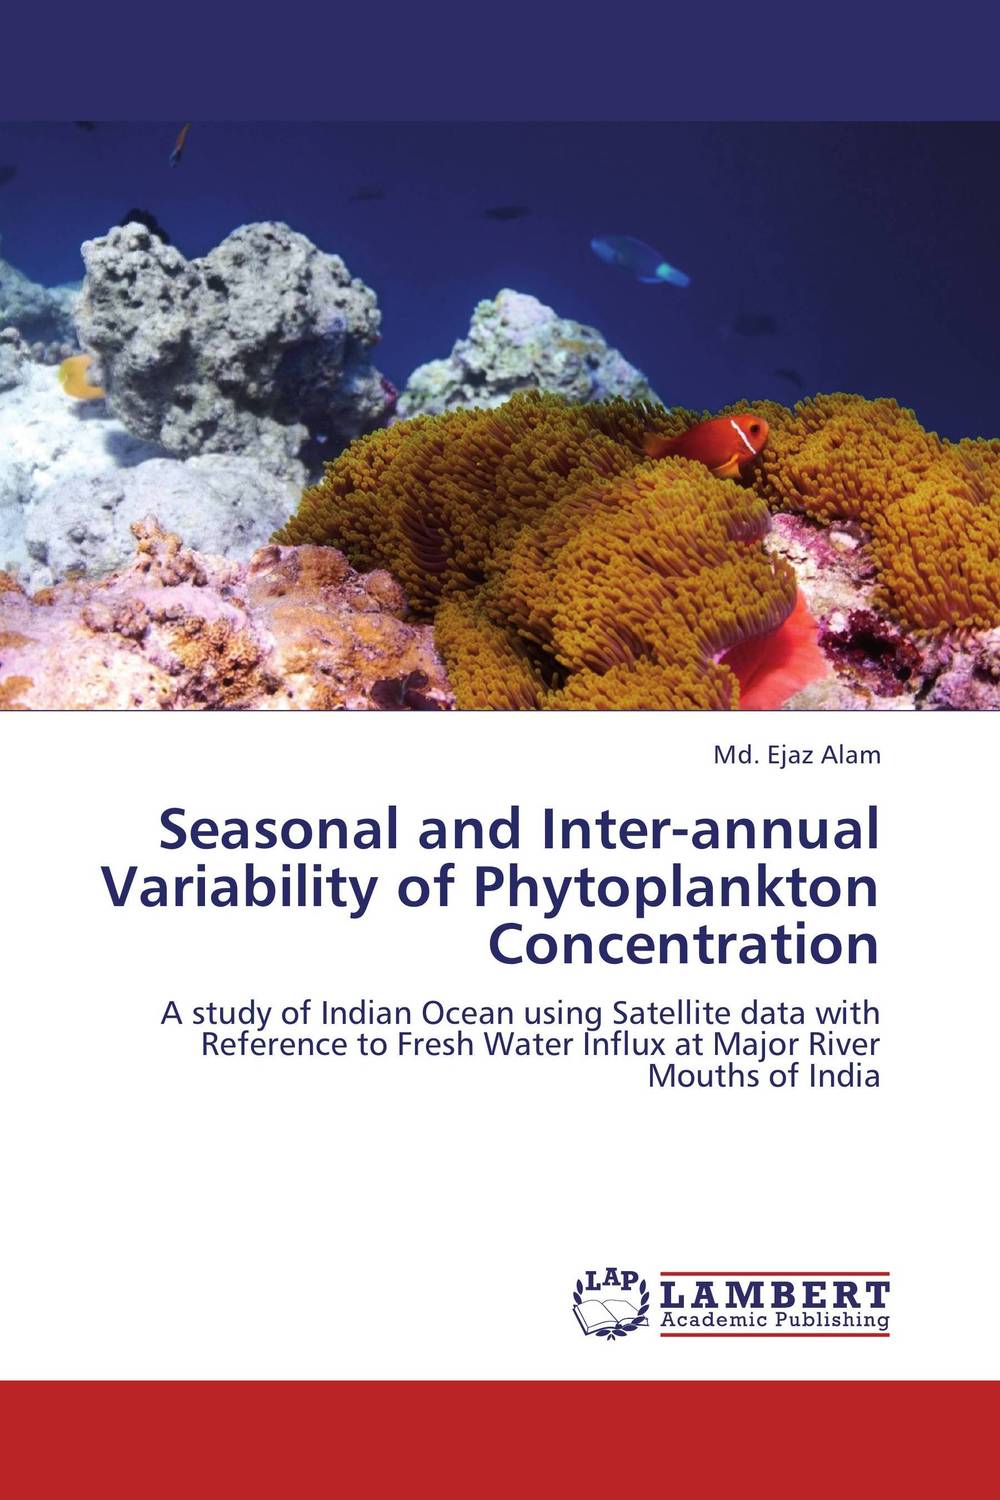 Seasonal and Inter-annual Variability of Phytoplankton Concentration